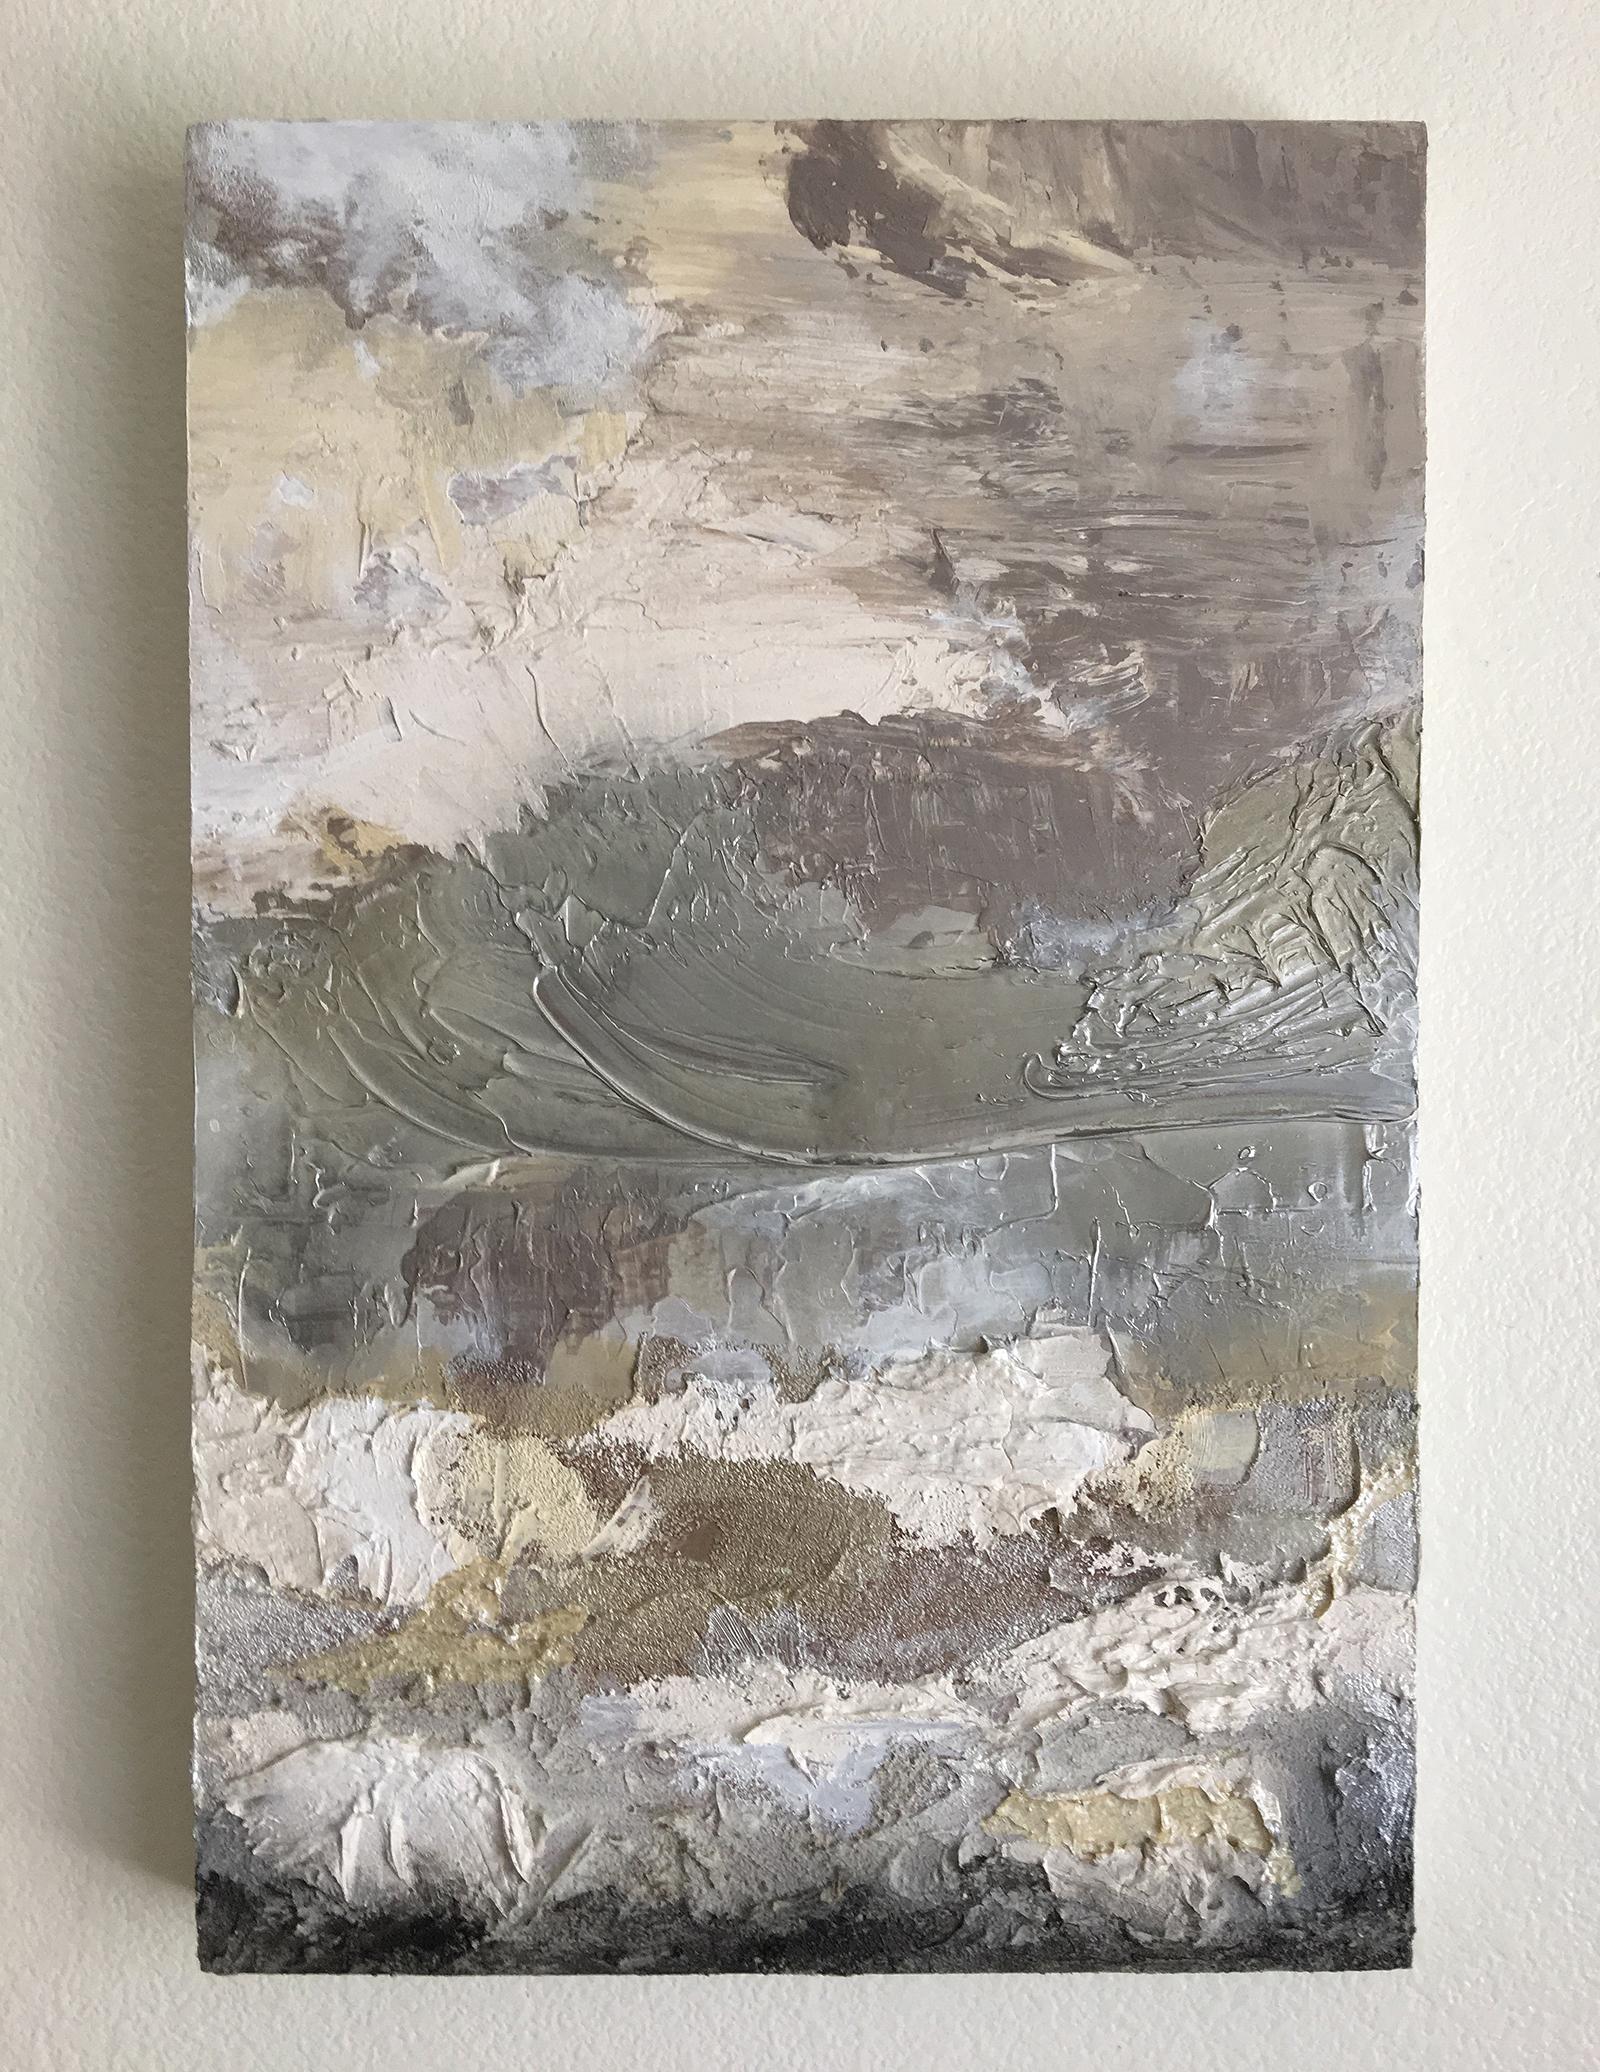 <p>Artist Comments<br /> My inspiration came from a dream where I was painting en plein air in a beach setting. This series was painted on the beach in my dream and may be interpreted as purely abstract, landscape or waterscape.  I created the work